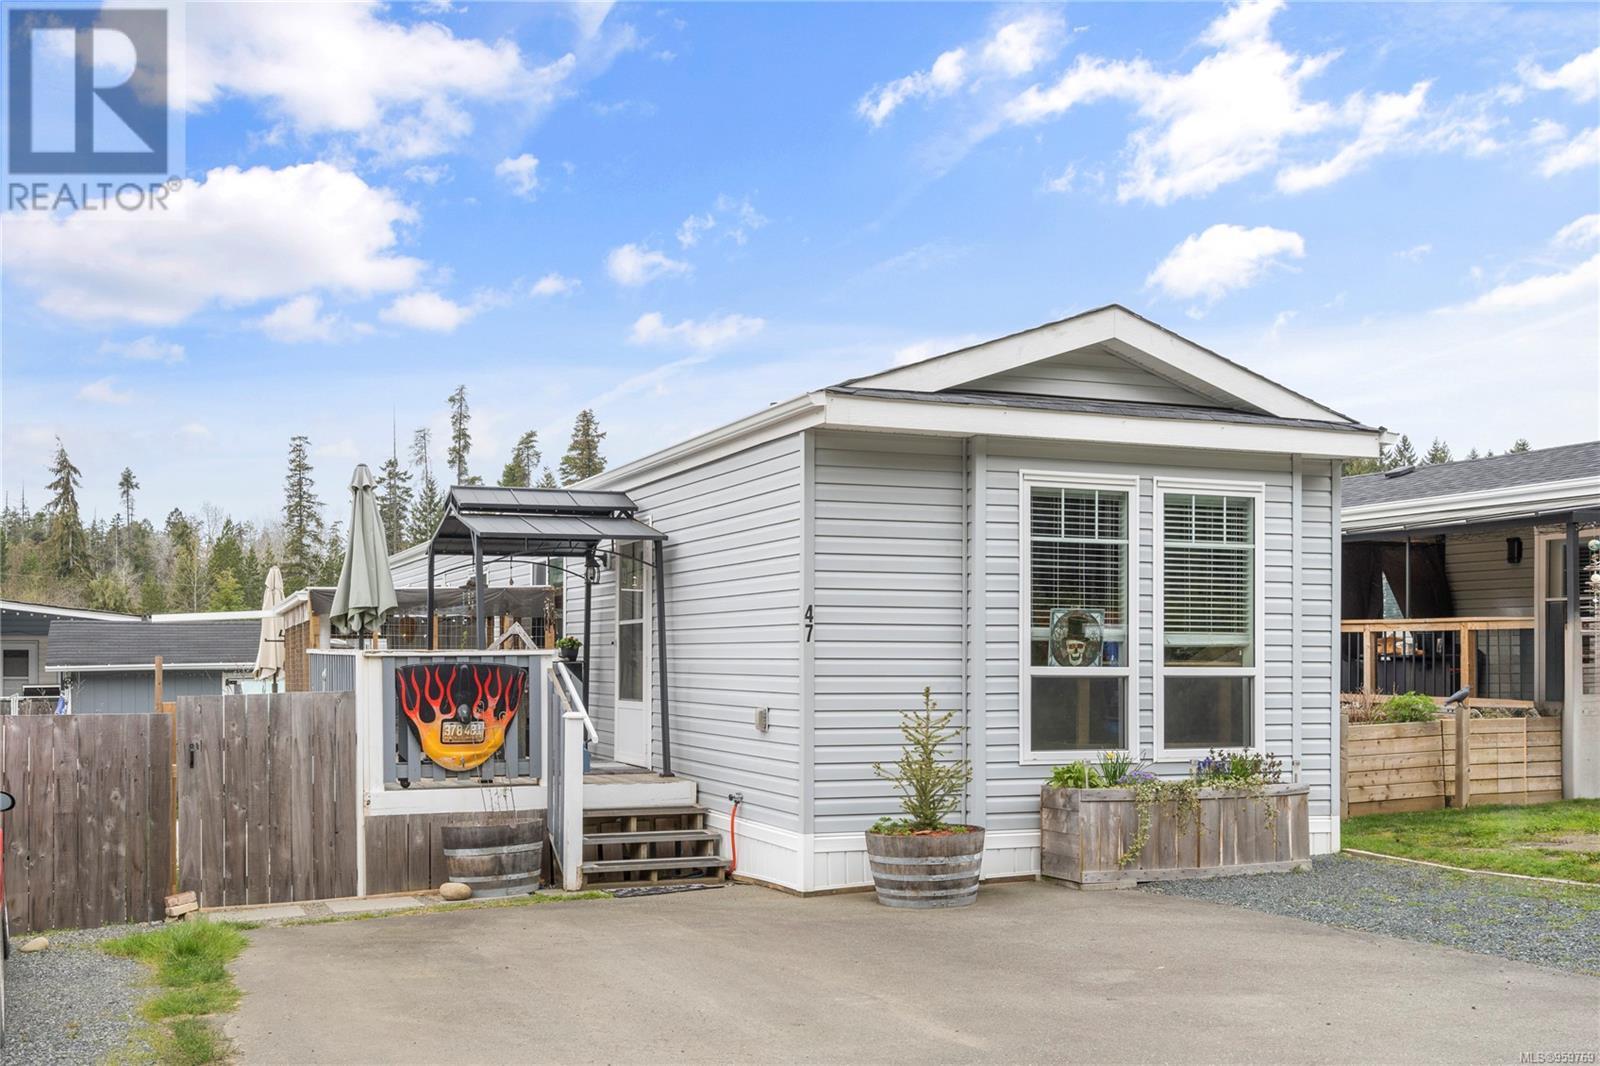 47 1720 Whibley Rd, coombs, British Columbia